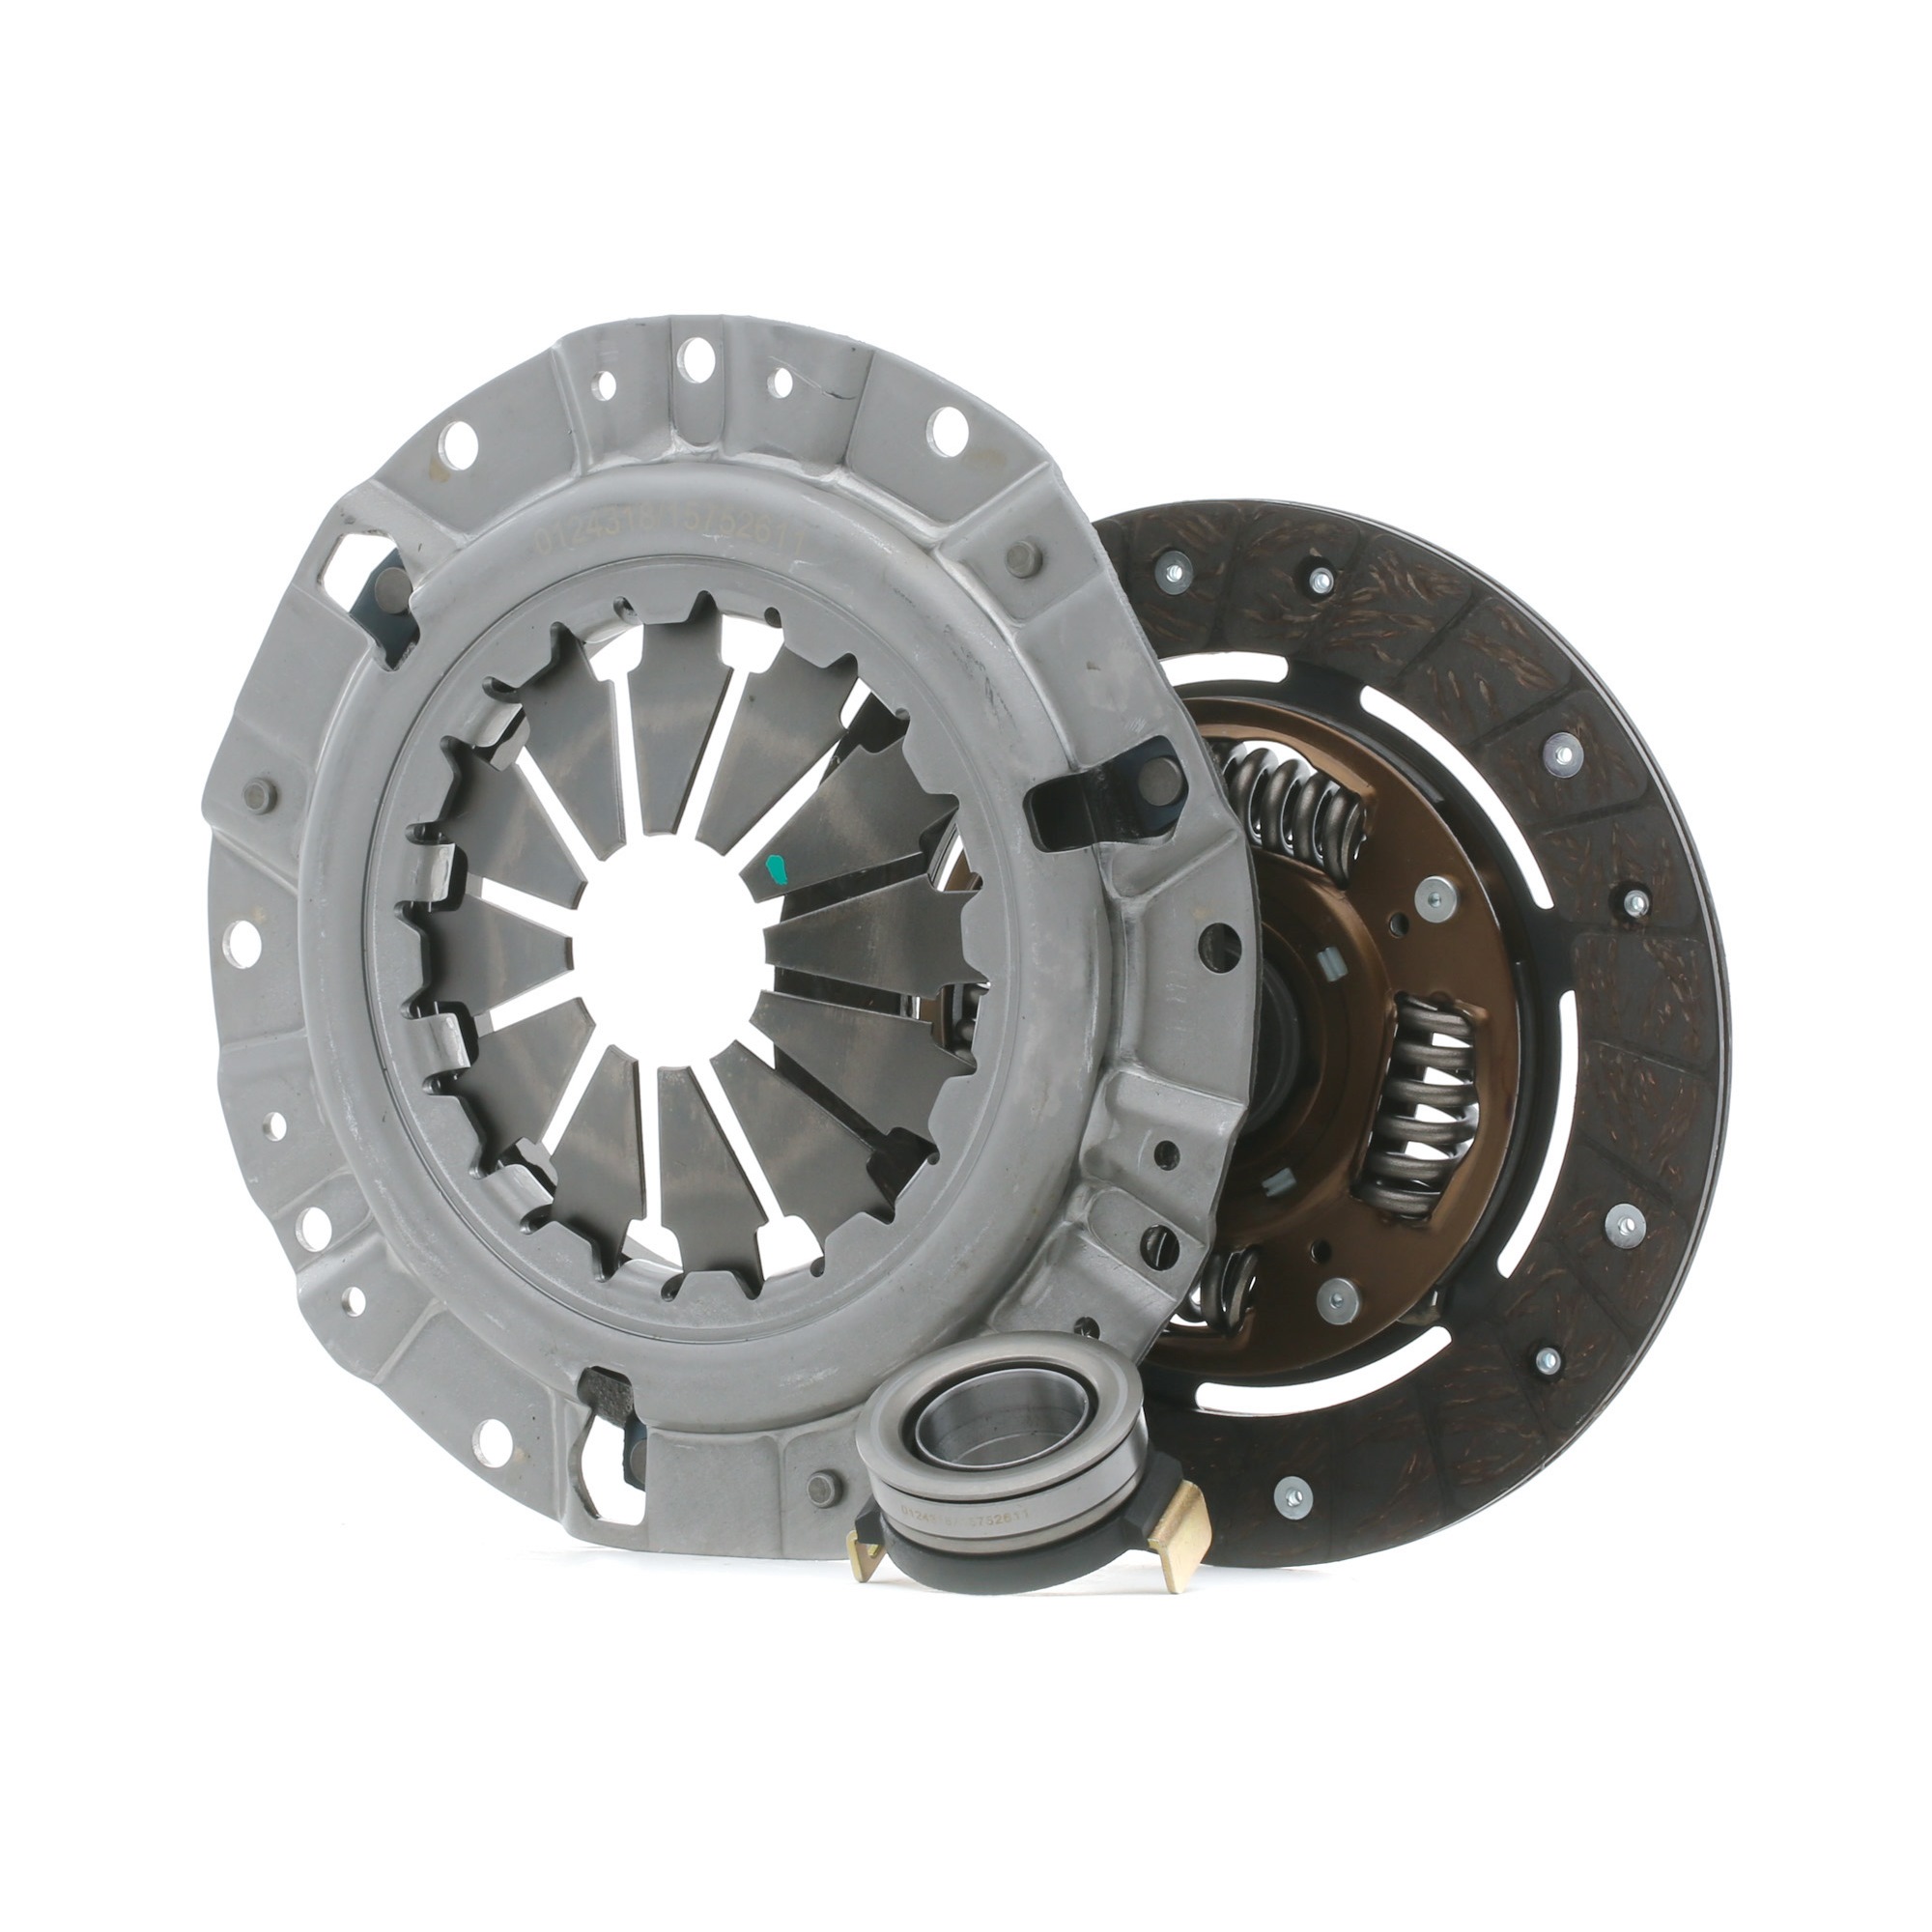 STARK SKCK-0100980 Clutch kit three-piece, with clutch release bearing, with clutch disc, 190mm